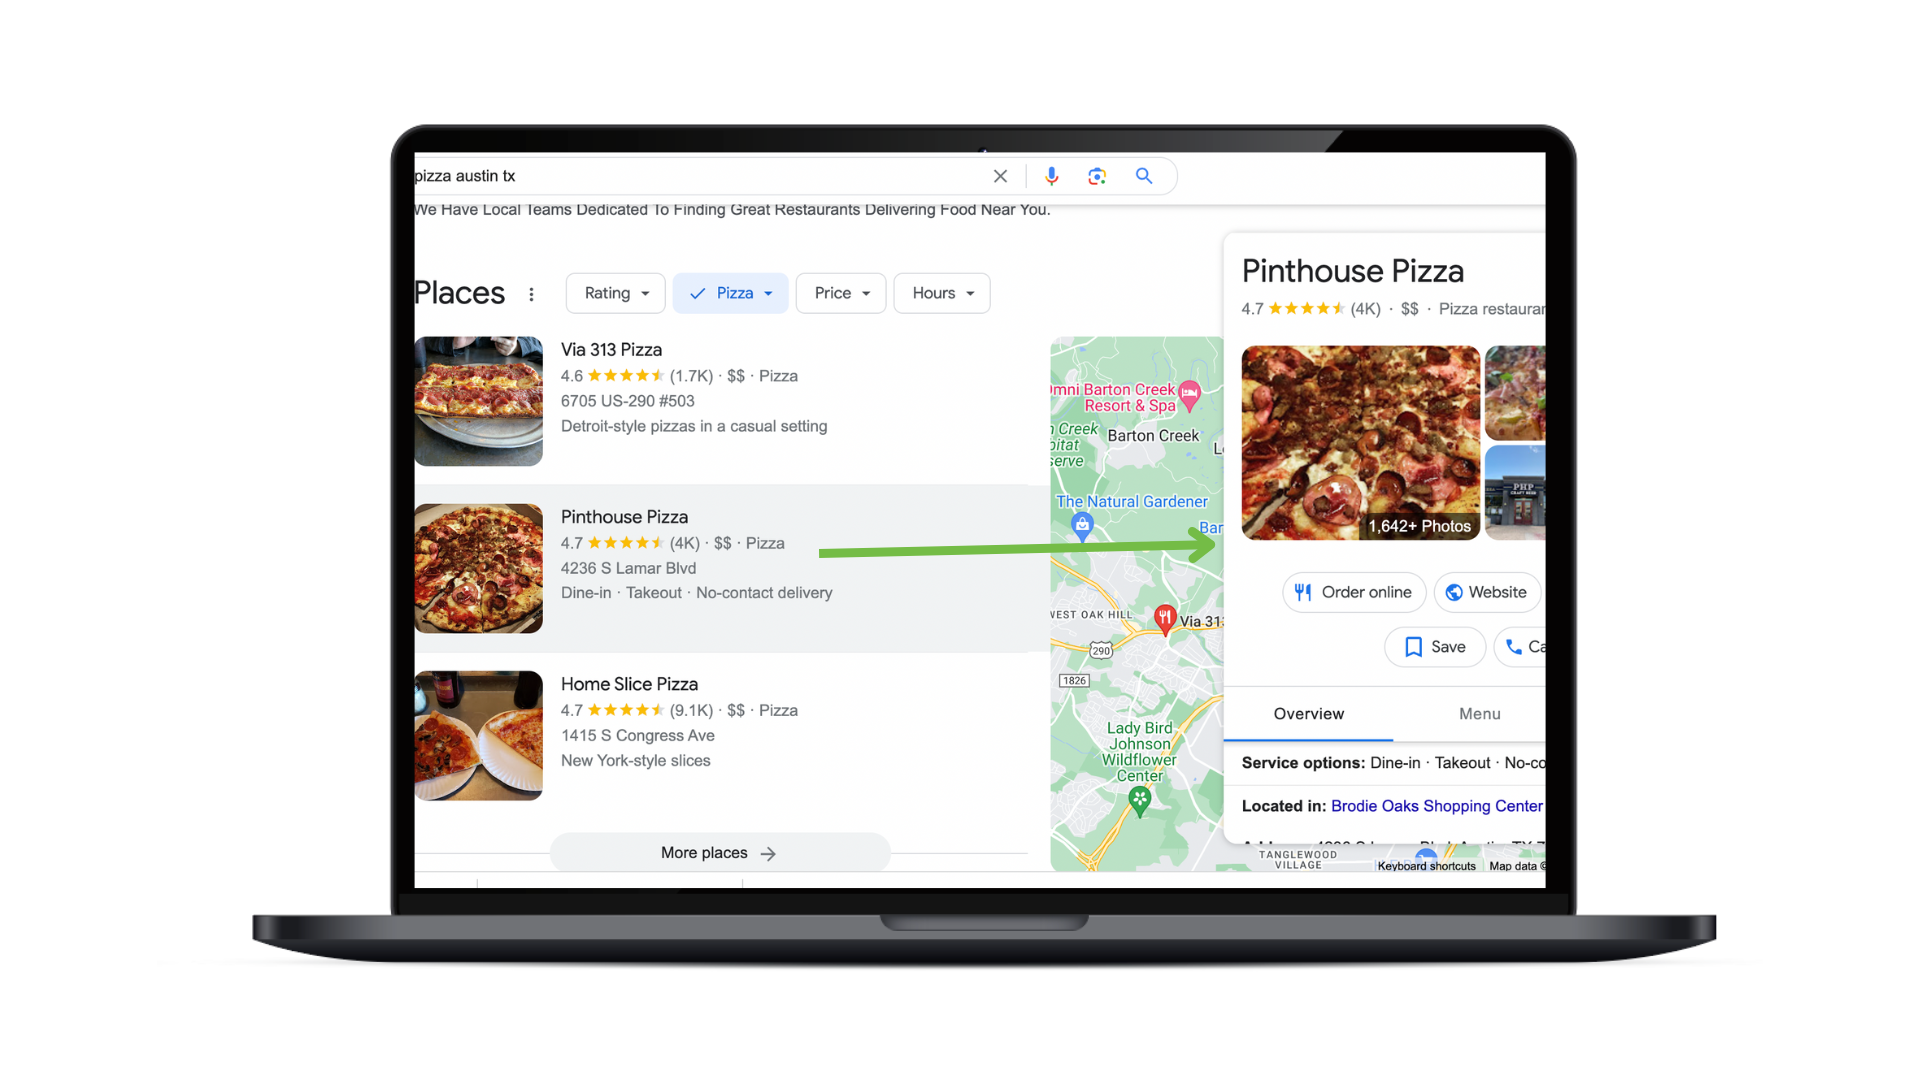 An example of a Google 3-Pack for the search "pizza austin TX"